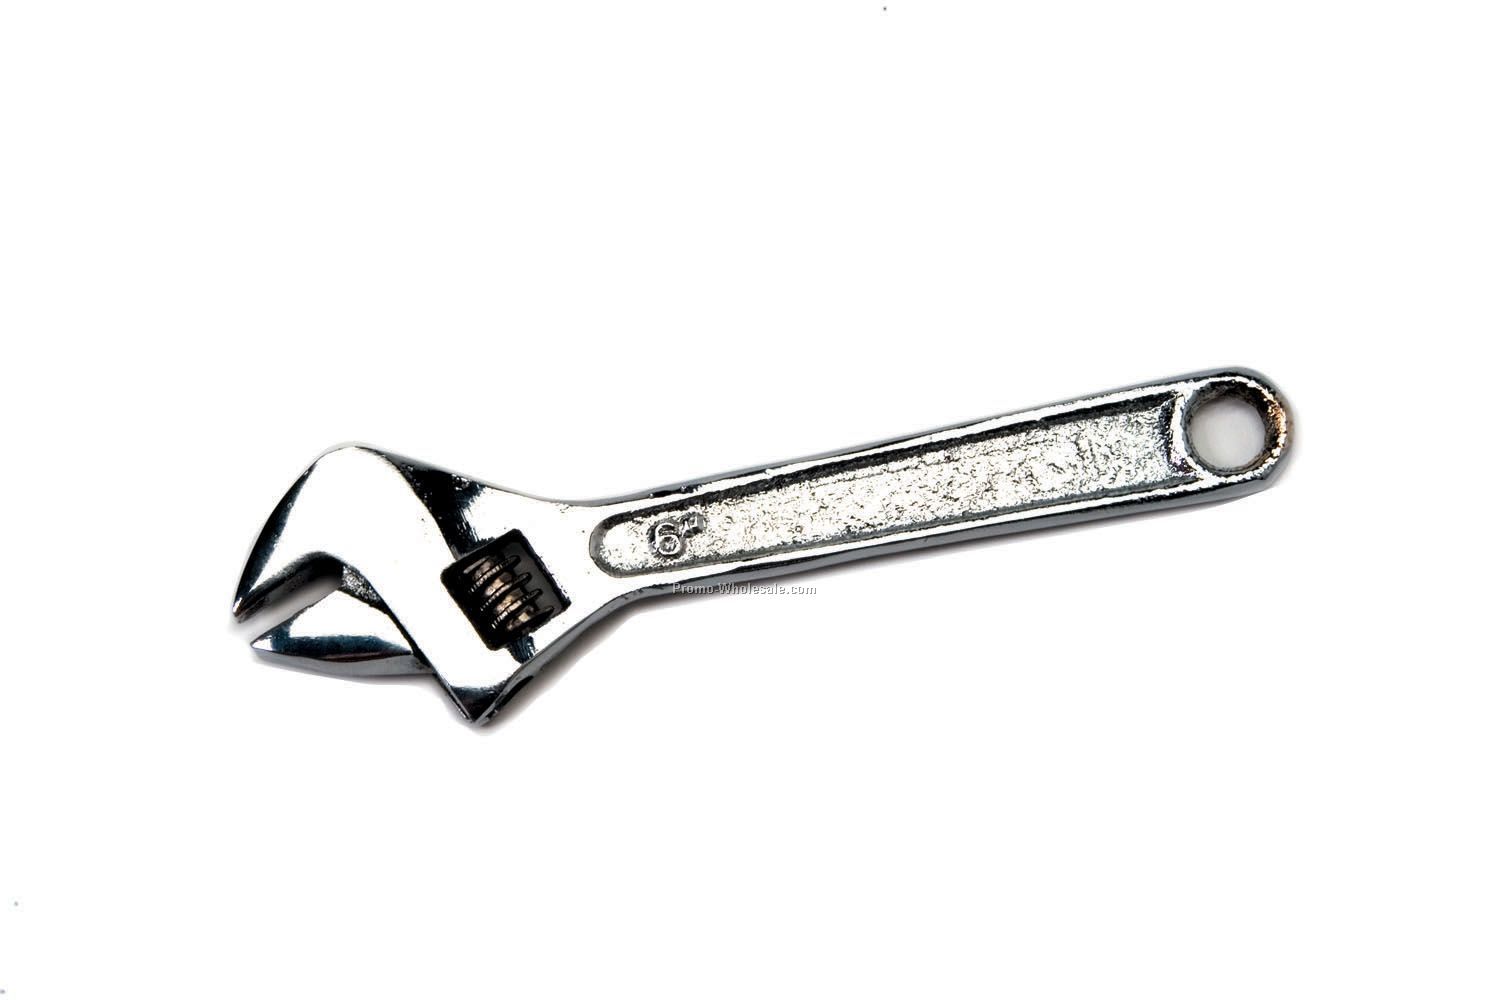 6" Adjustable Wrench (Blank)